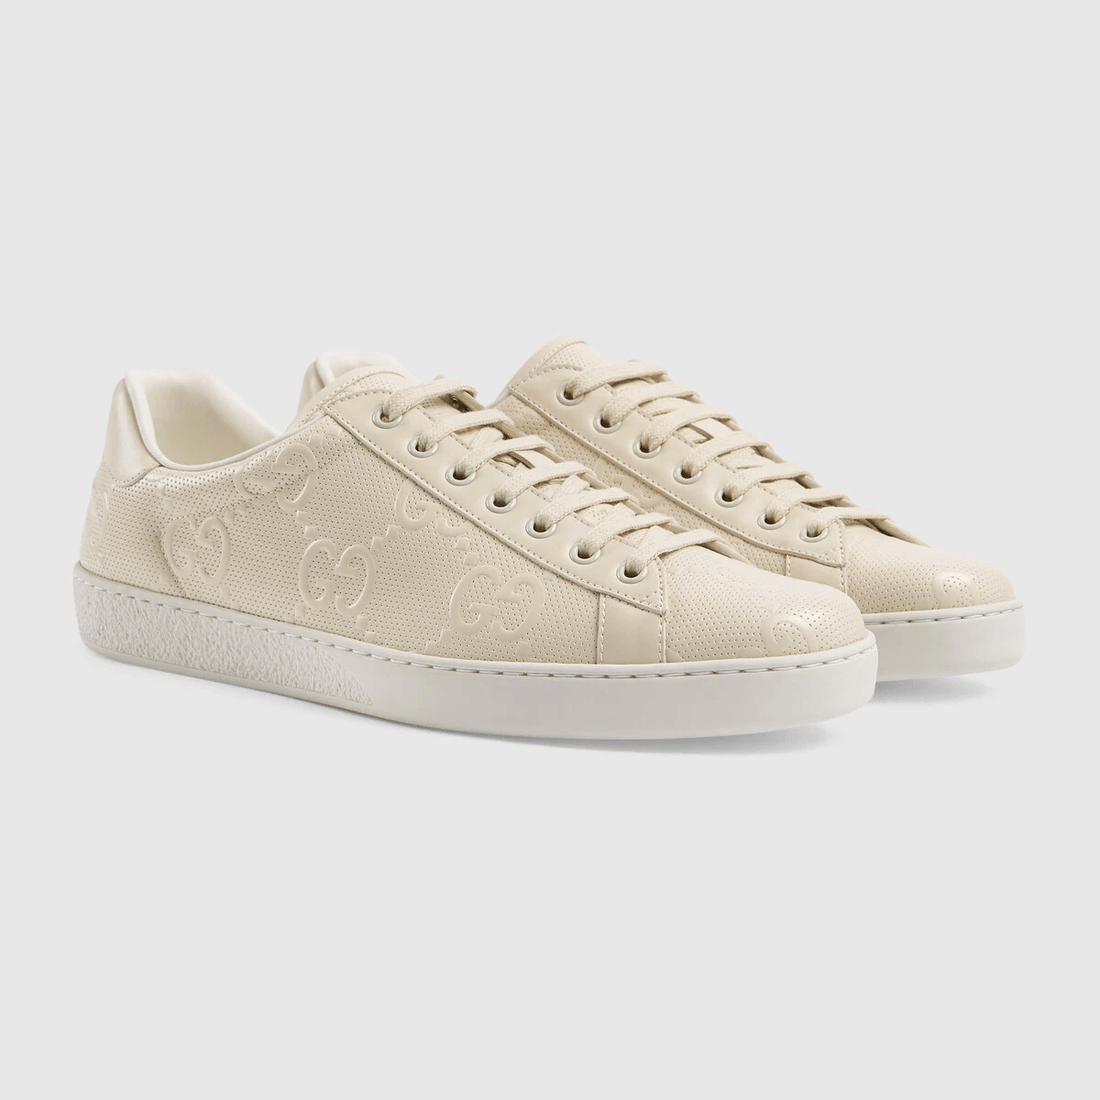 Gucci Ace GG White Leather - VIARESELL